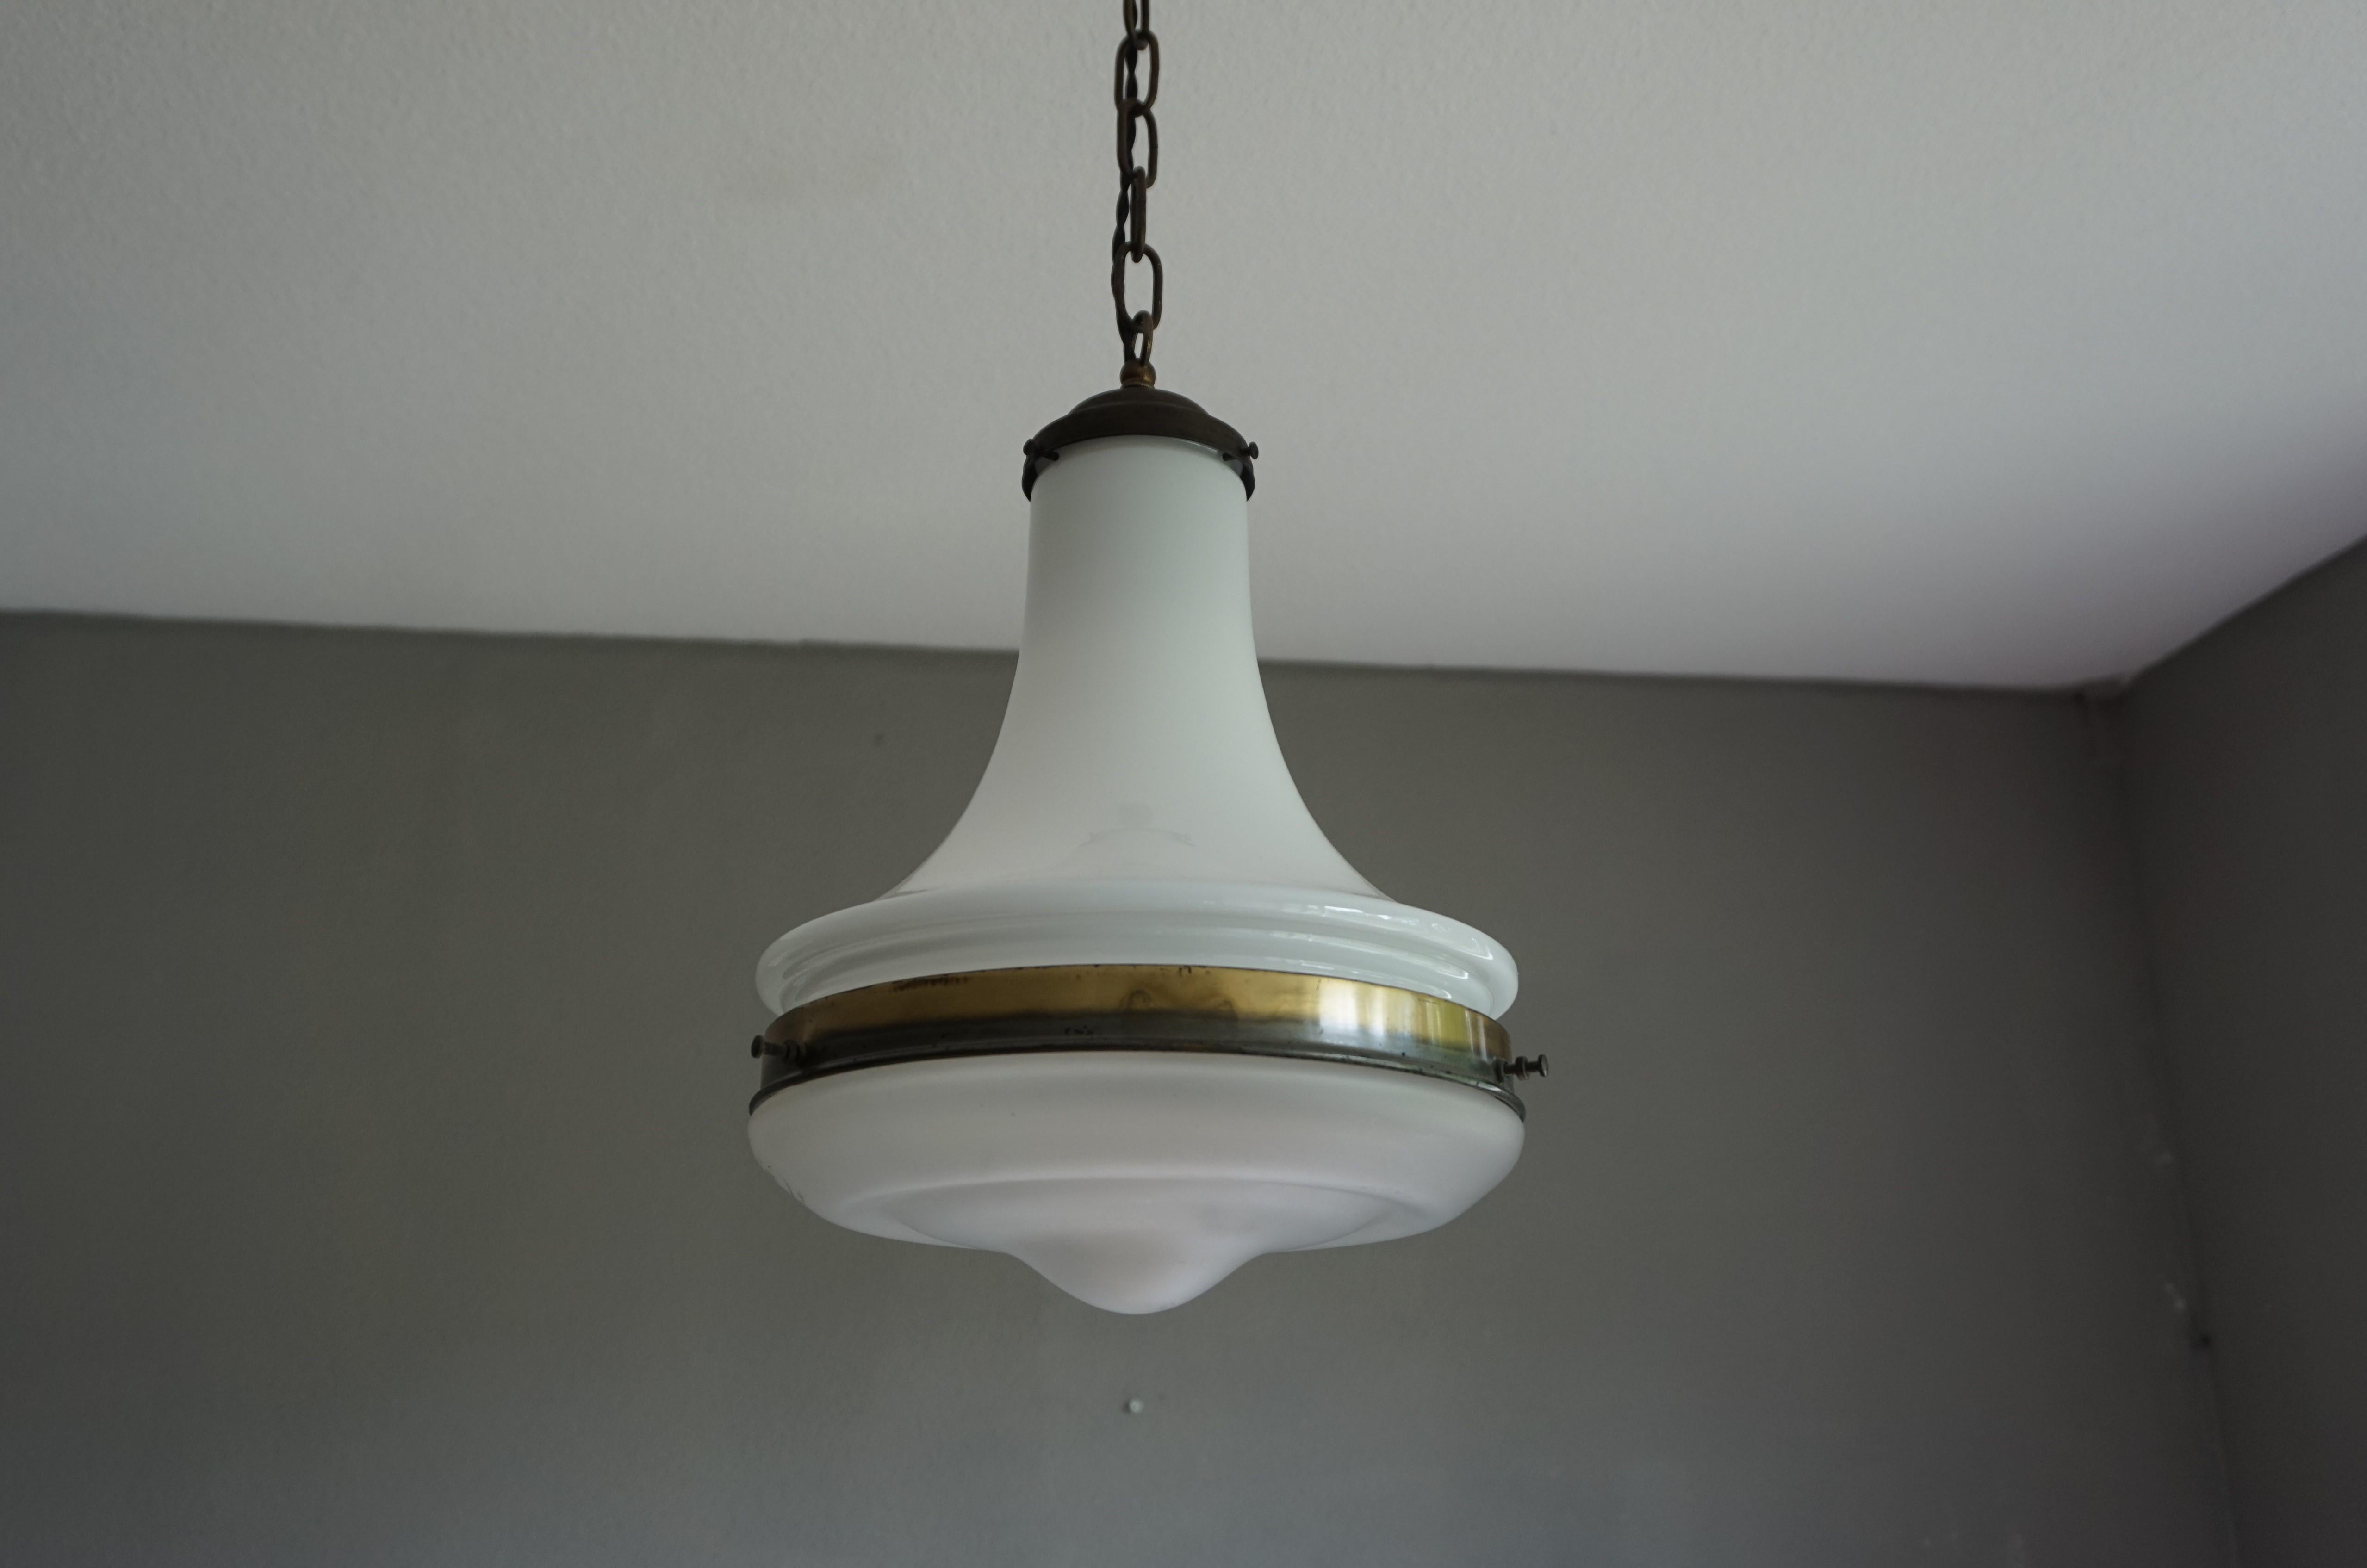 Hand-Crafted German Arts and Crafts Opaline & Glass Pendant / Light Fixture 1910 Marked Galea